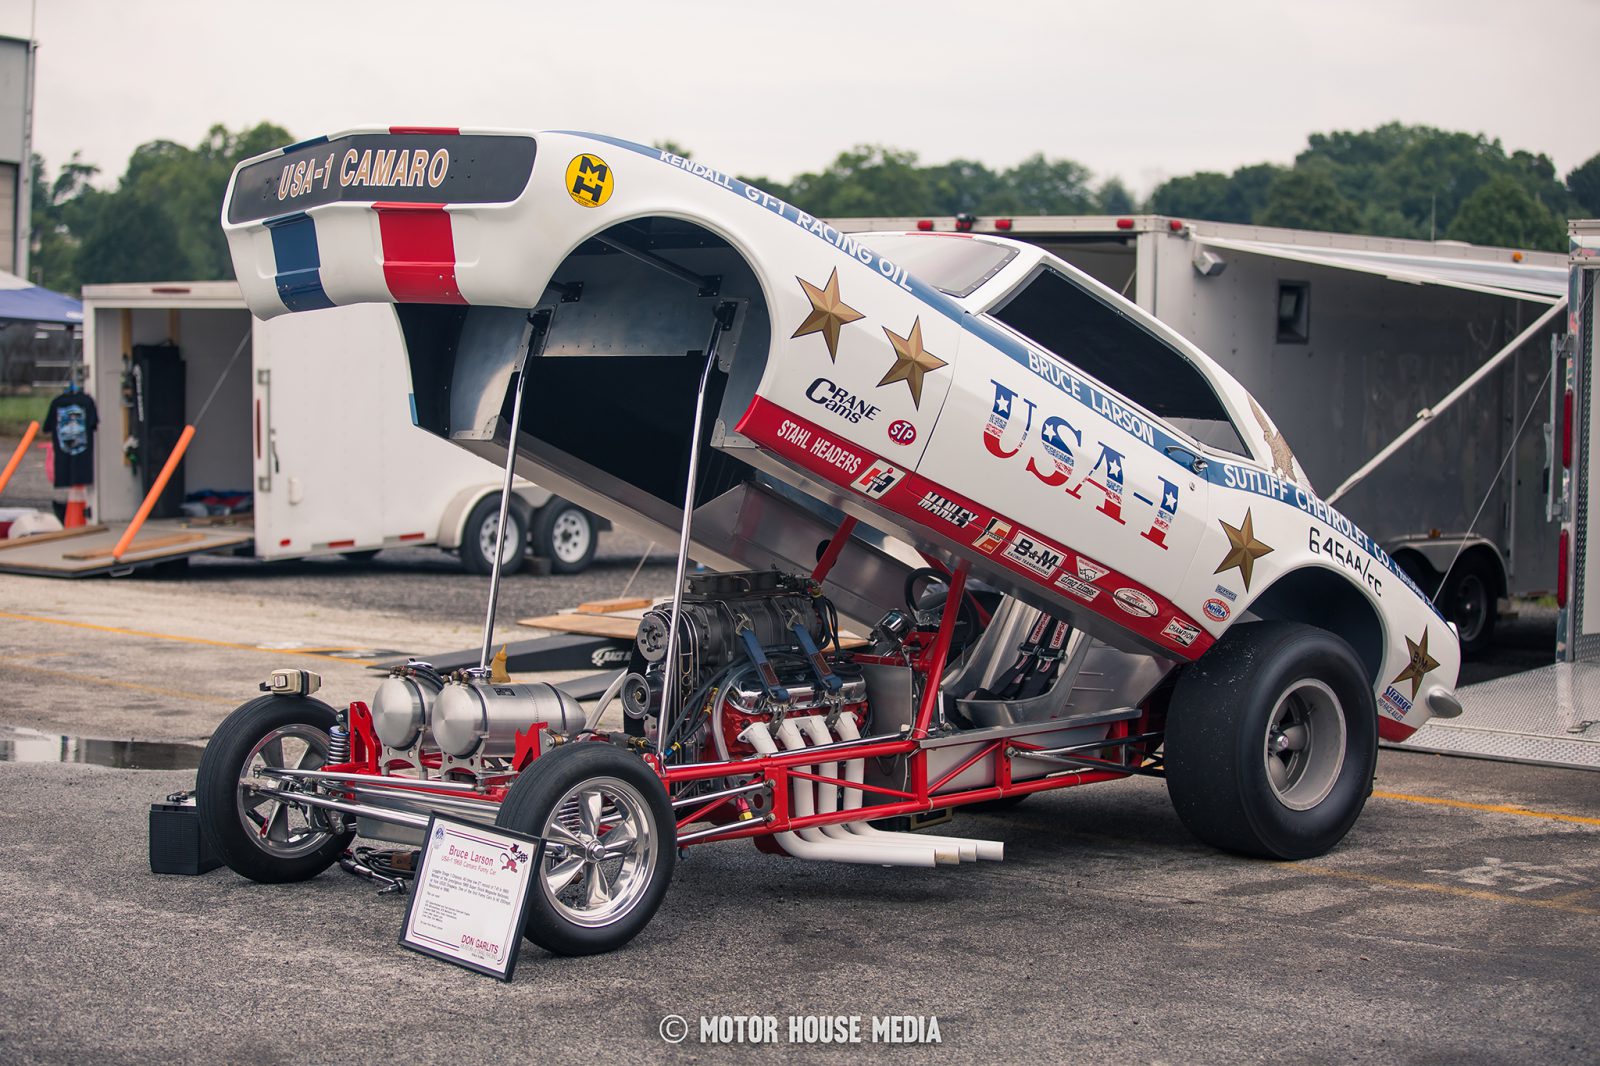 Bruce Larson's vintage Funny cars during Thunder Fest by Summit racing at the GoodGuys car show